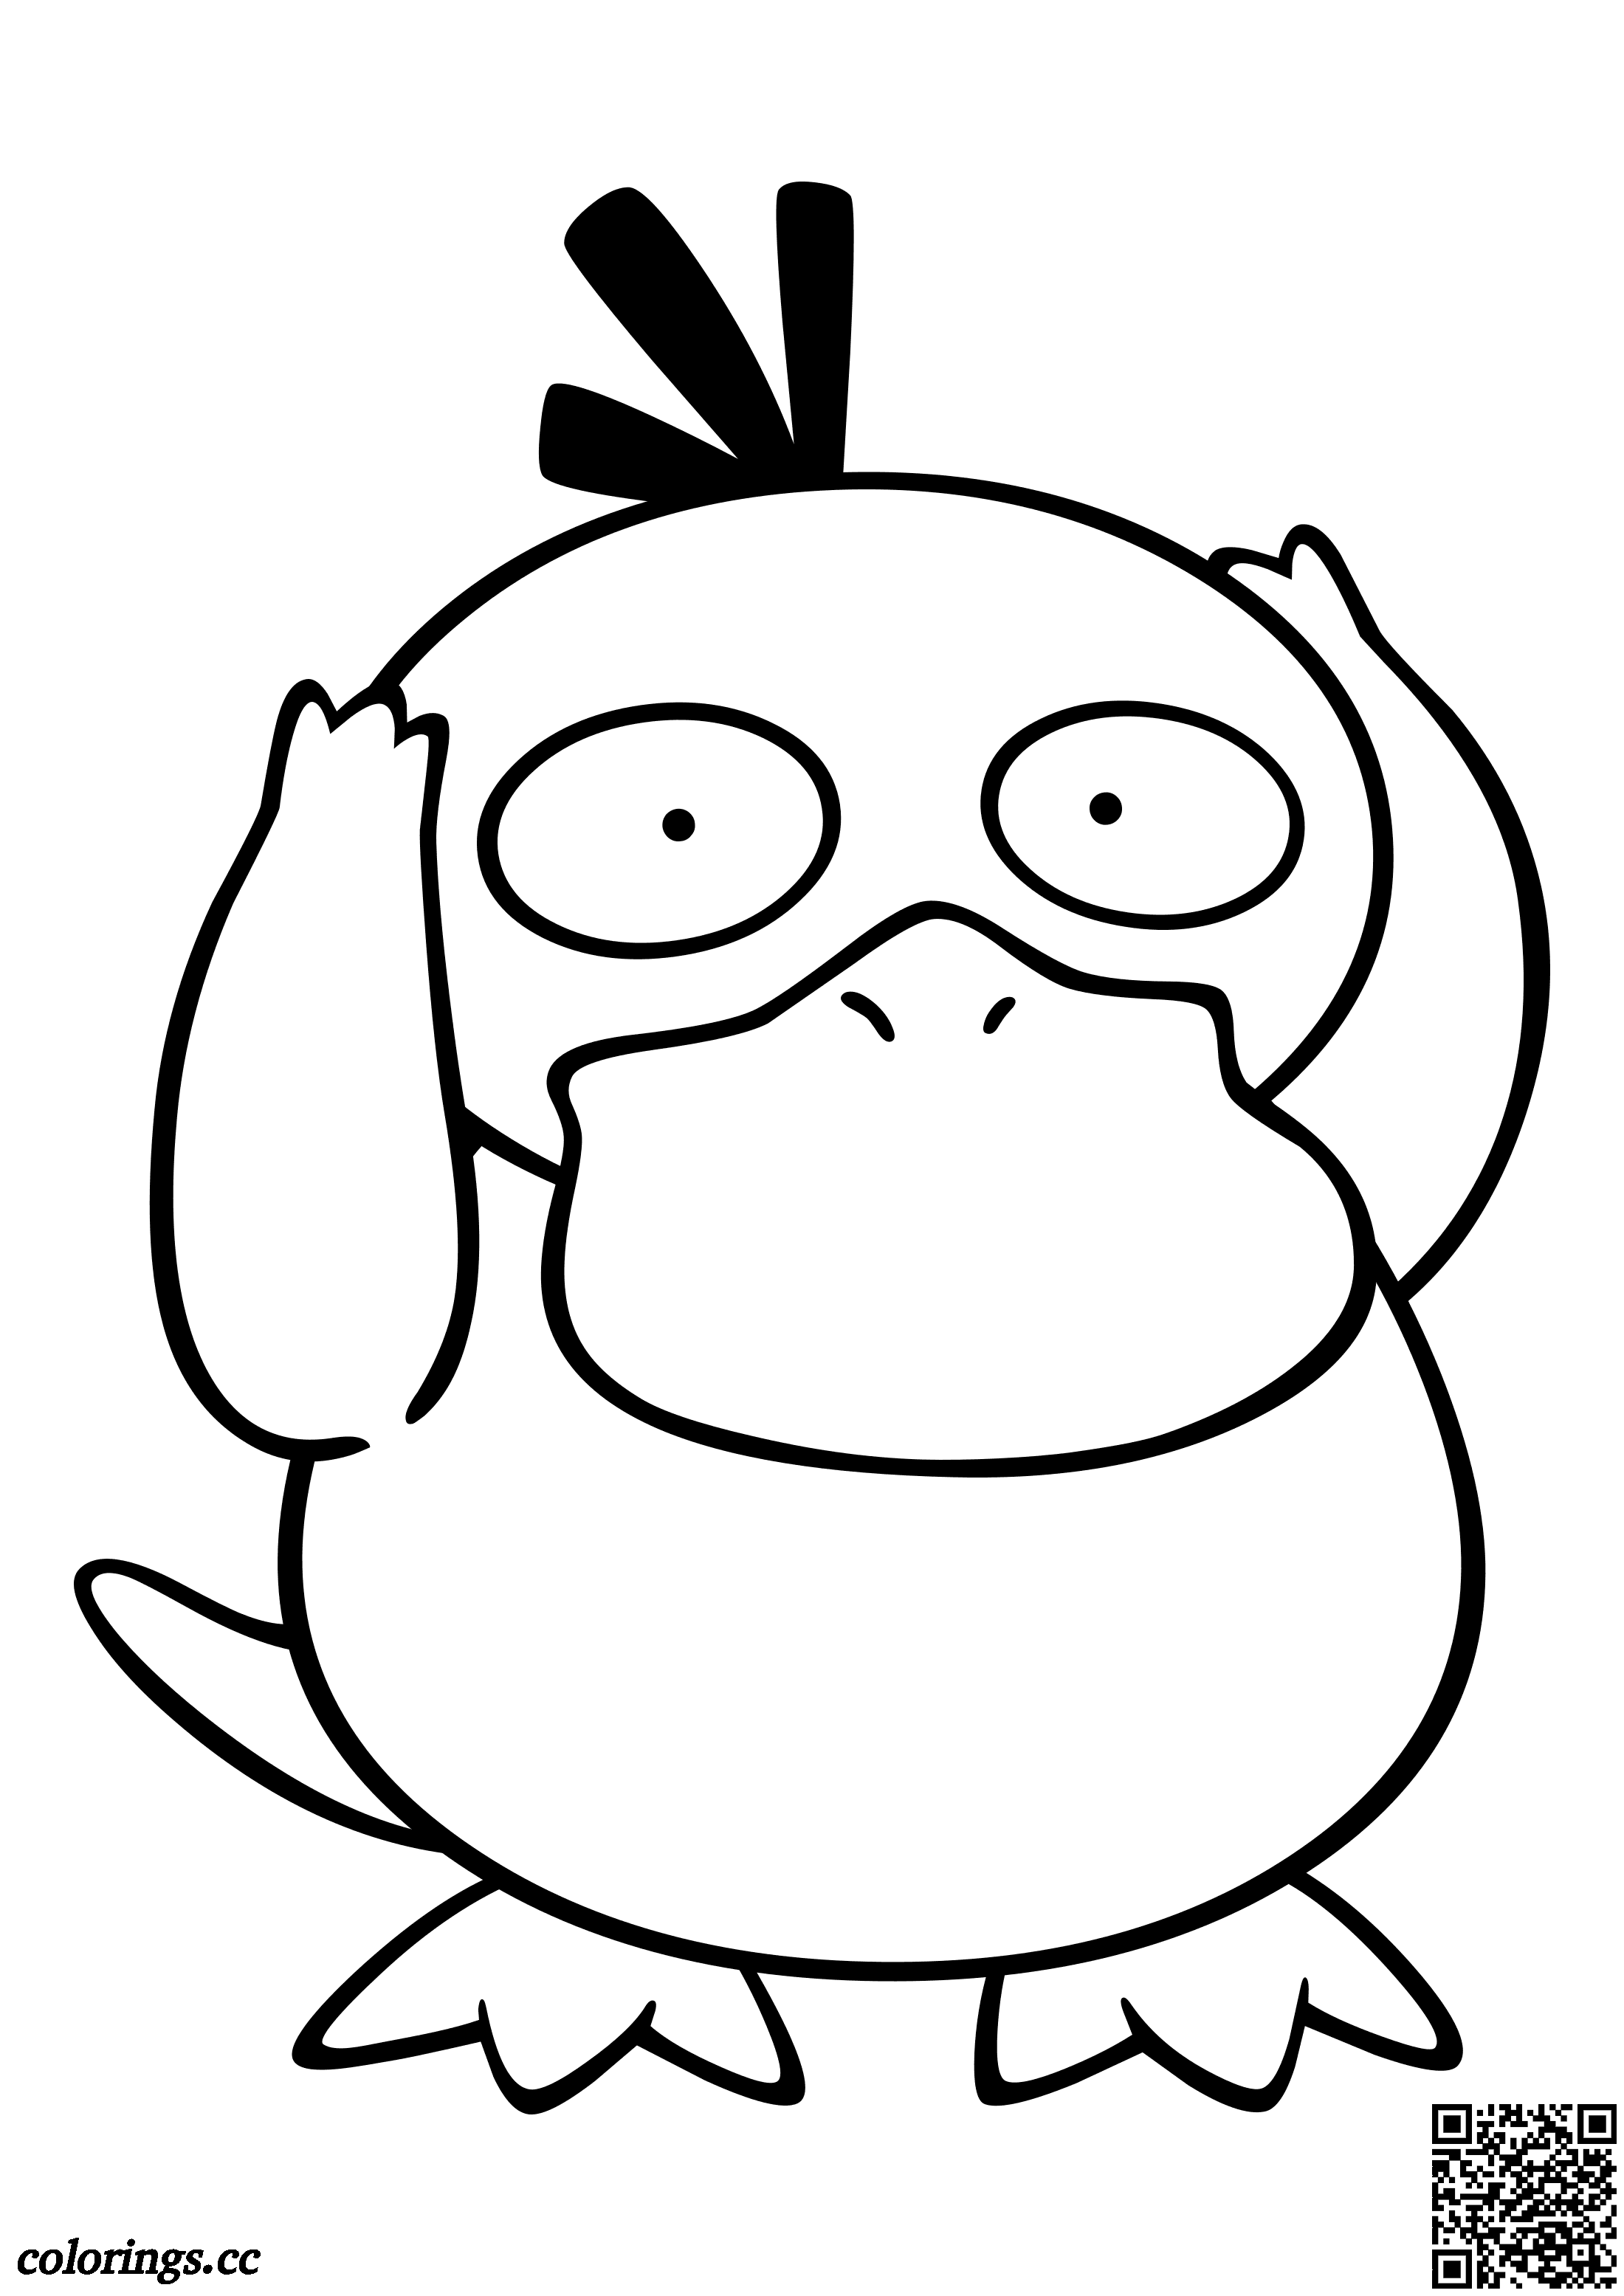 054 - Psyduck coloring pages, Pokemon coloring pages - Colorings.cc